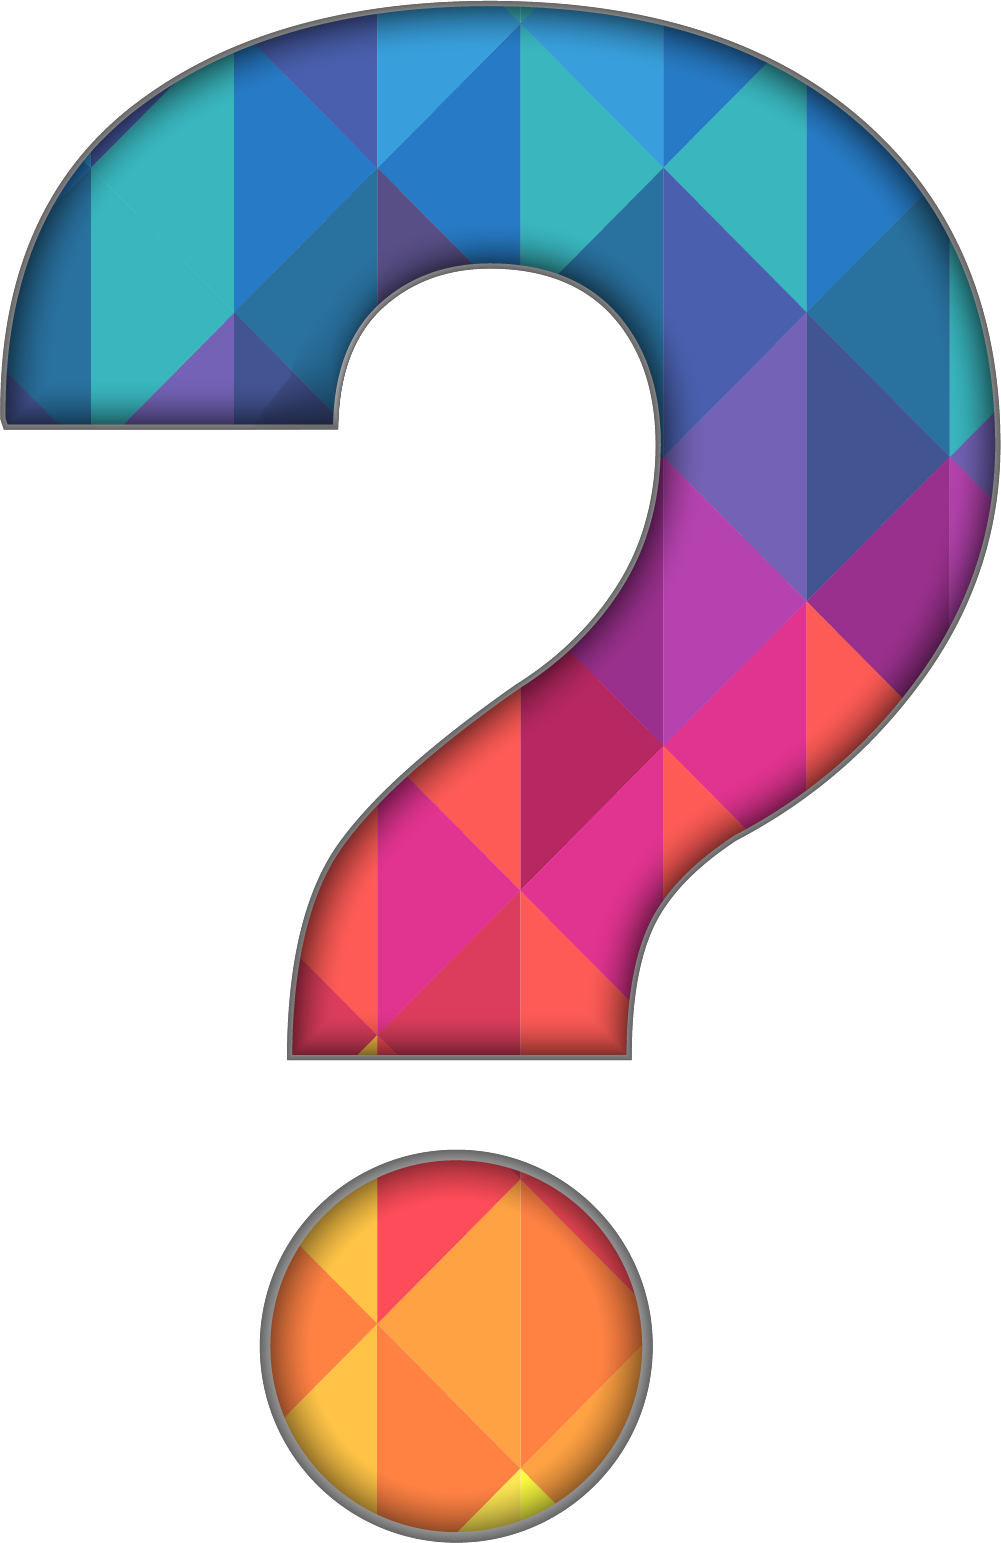 Question Mark Paintbrush Stained Glass Question Mark - Question Mark Paintbrush Stained Glass Question Mark (1001x1543)